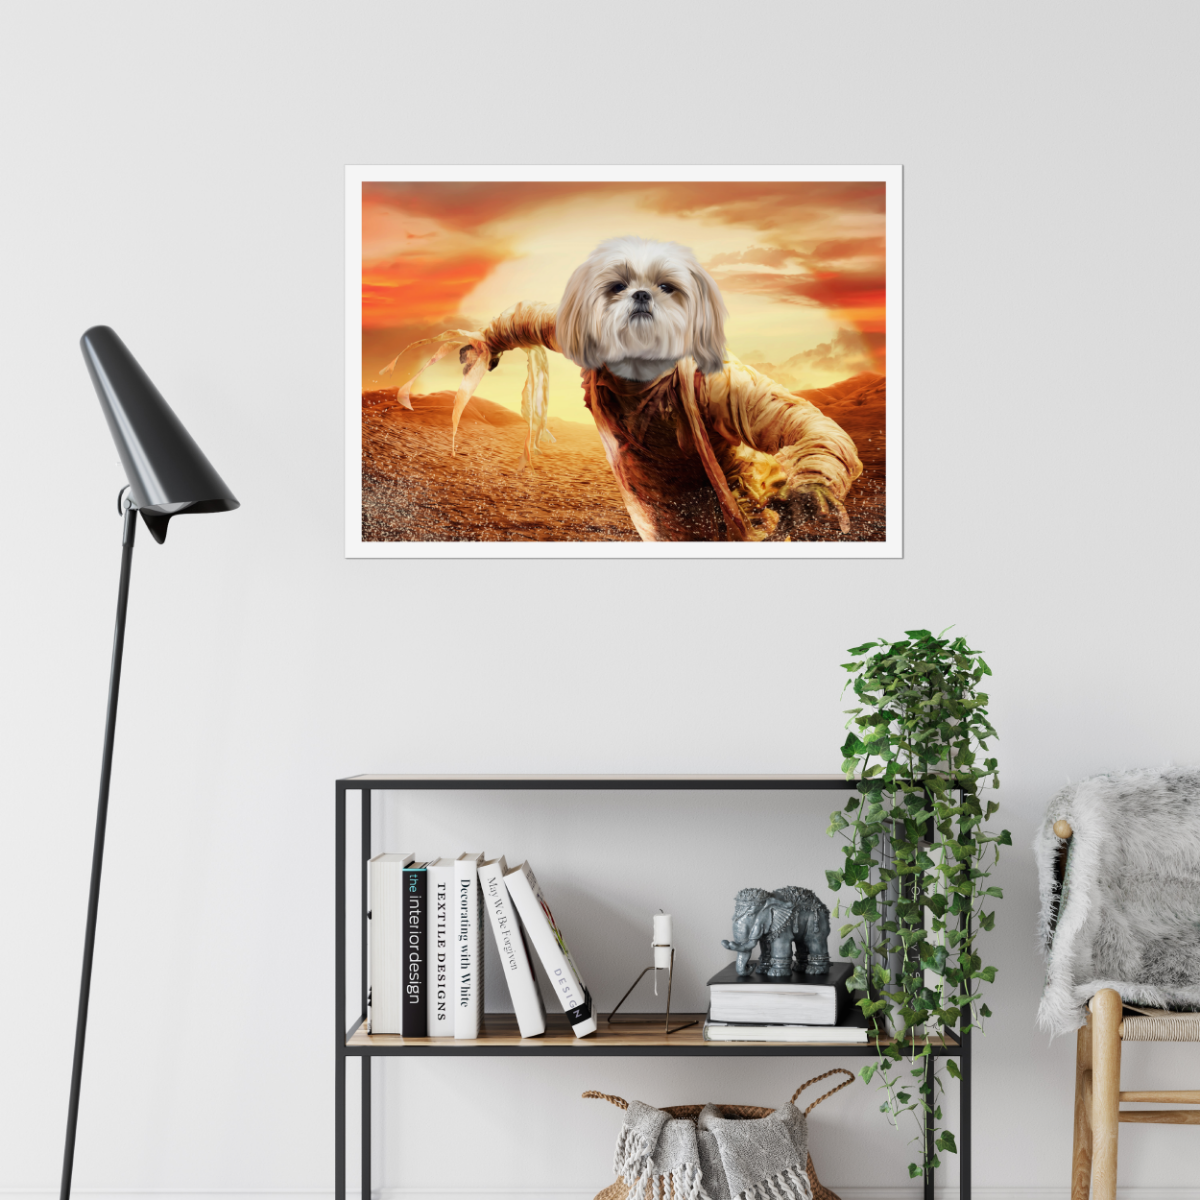 The Mummy: Custom Pet Poster - Paw & Glory - #pet portraits# - #dog portraits# - #pet portraits uk#Paw & Glory, paw and glory, dog portraits as humans, custom pet paintings, cat picture painting, dog and couple portrait, aristocrat dog painting, animal portrait pictures, pet portraits